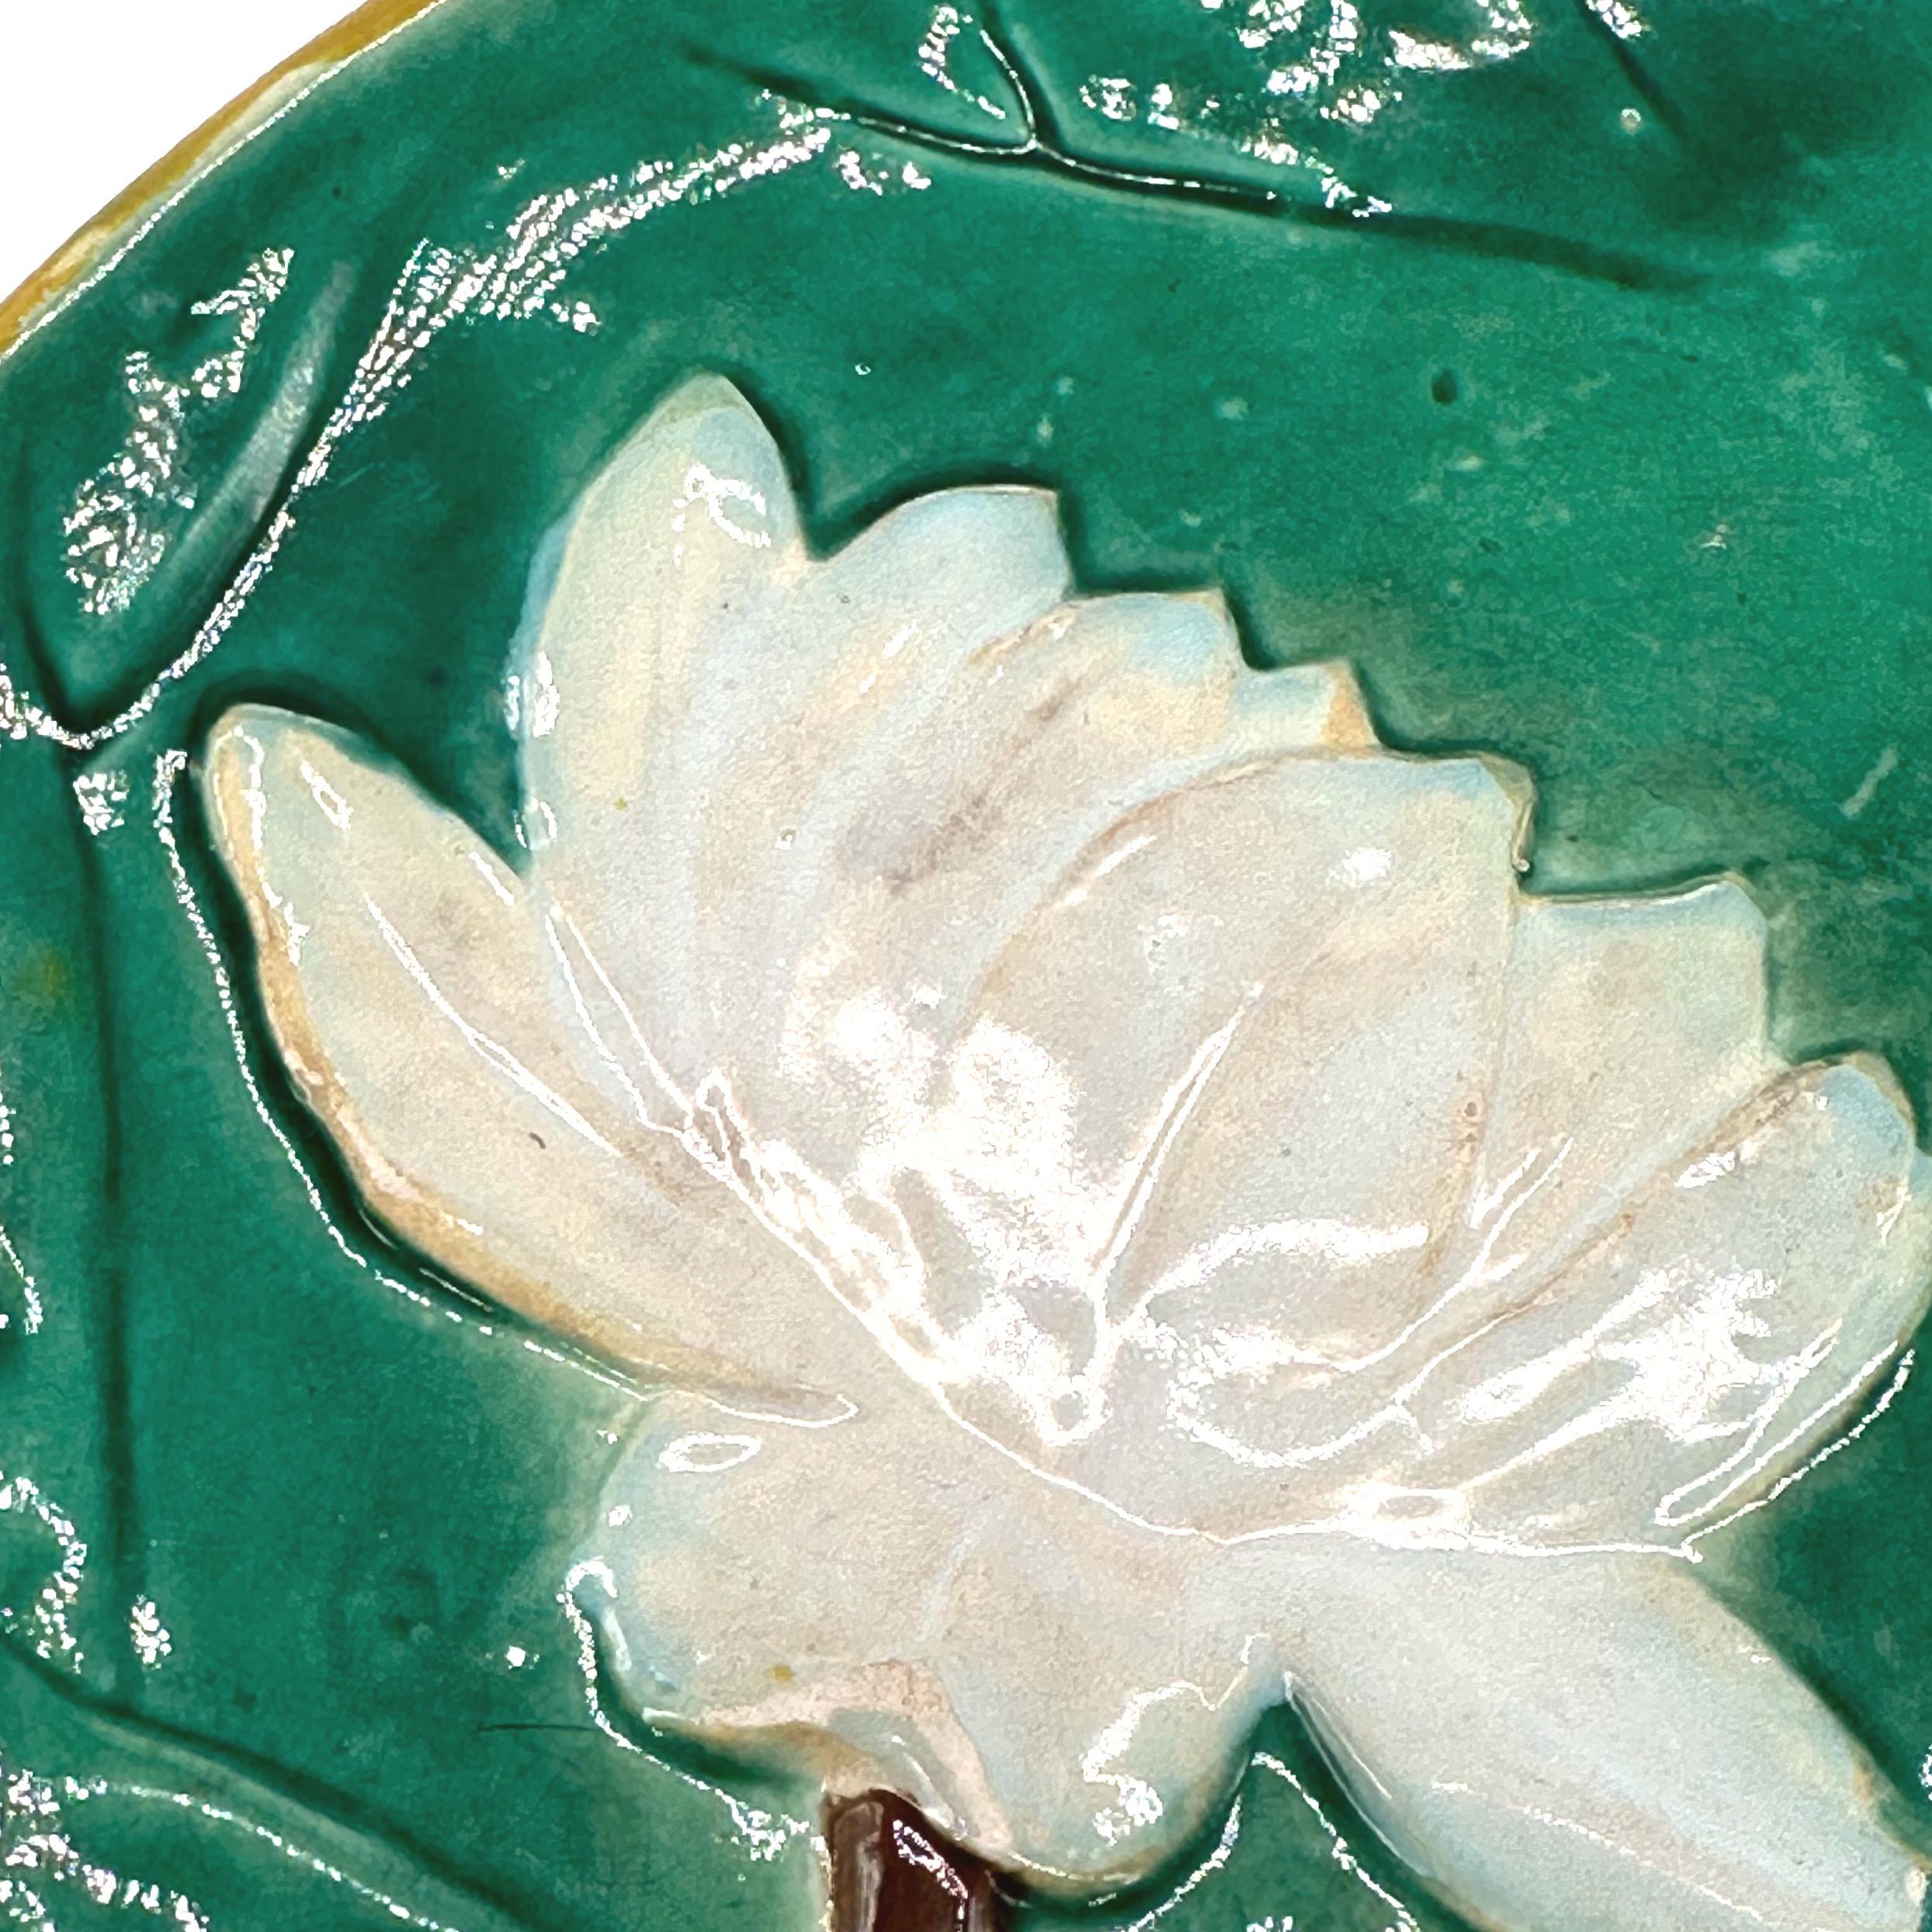 Molded Joesph Holdcroft Majolica Pond Lily Plate, Signed, English, circa 1875 For Sale